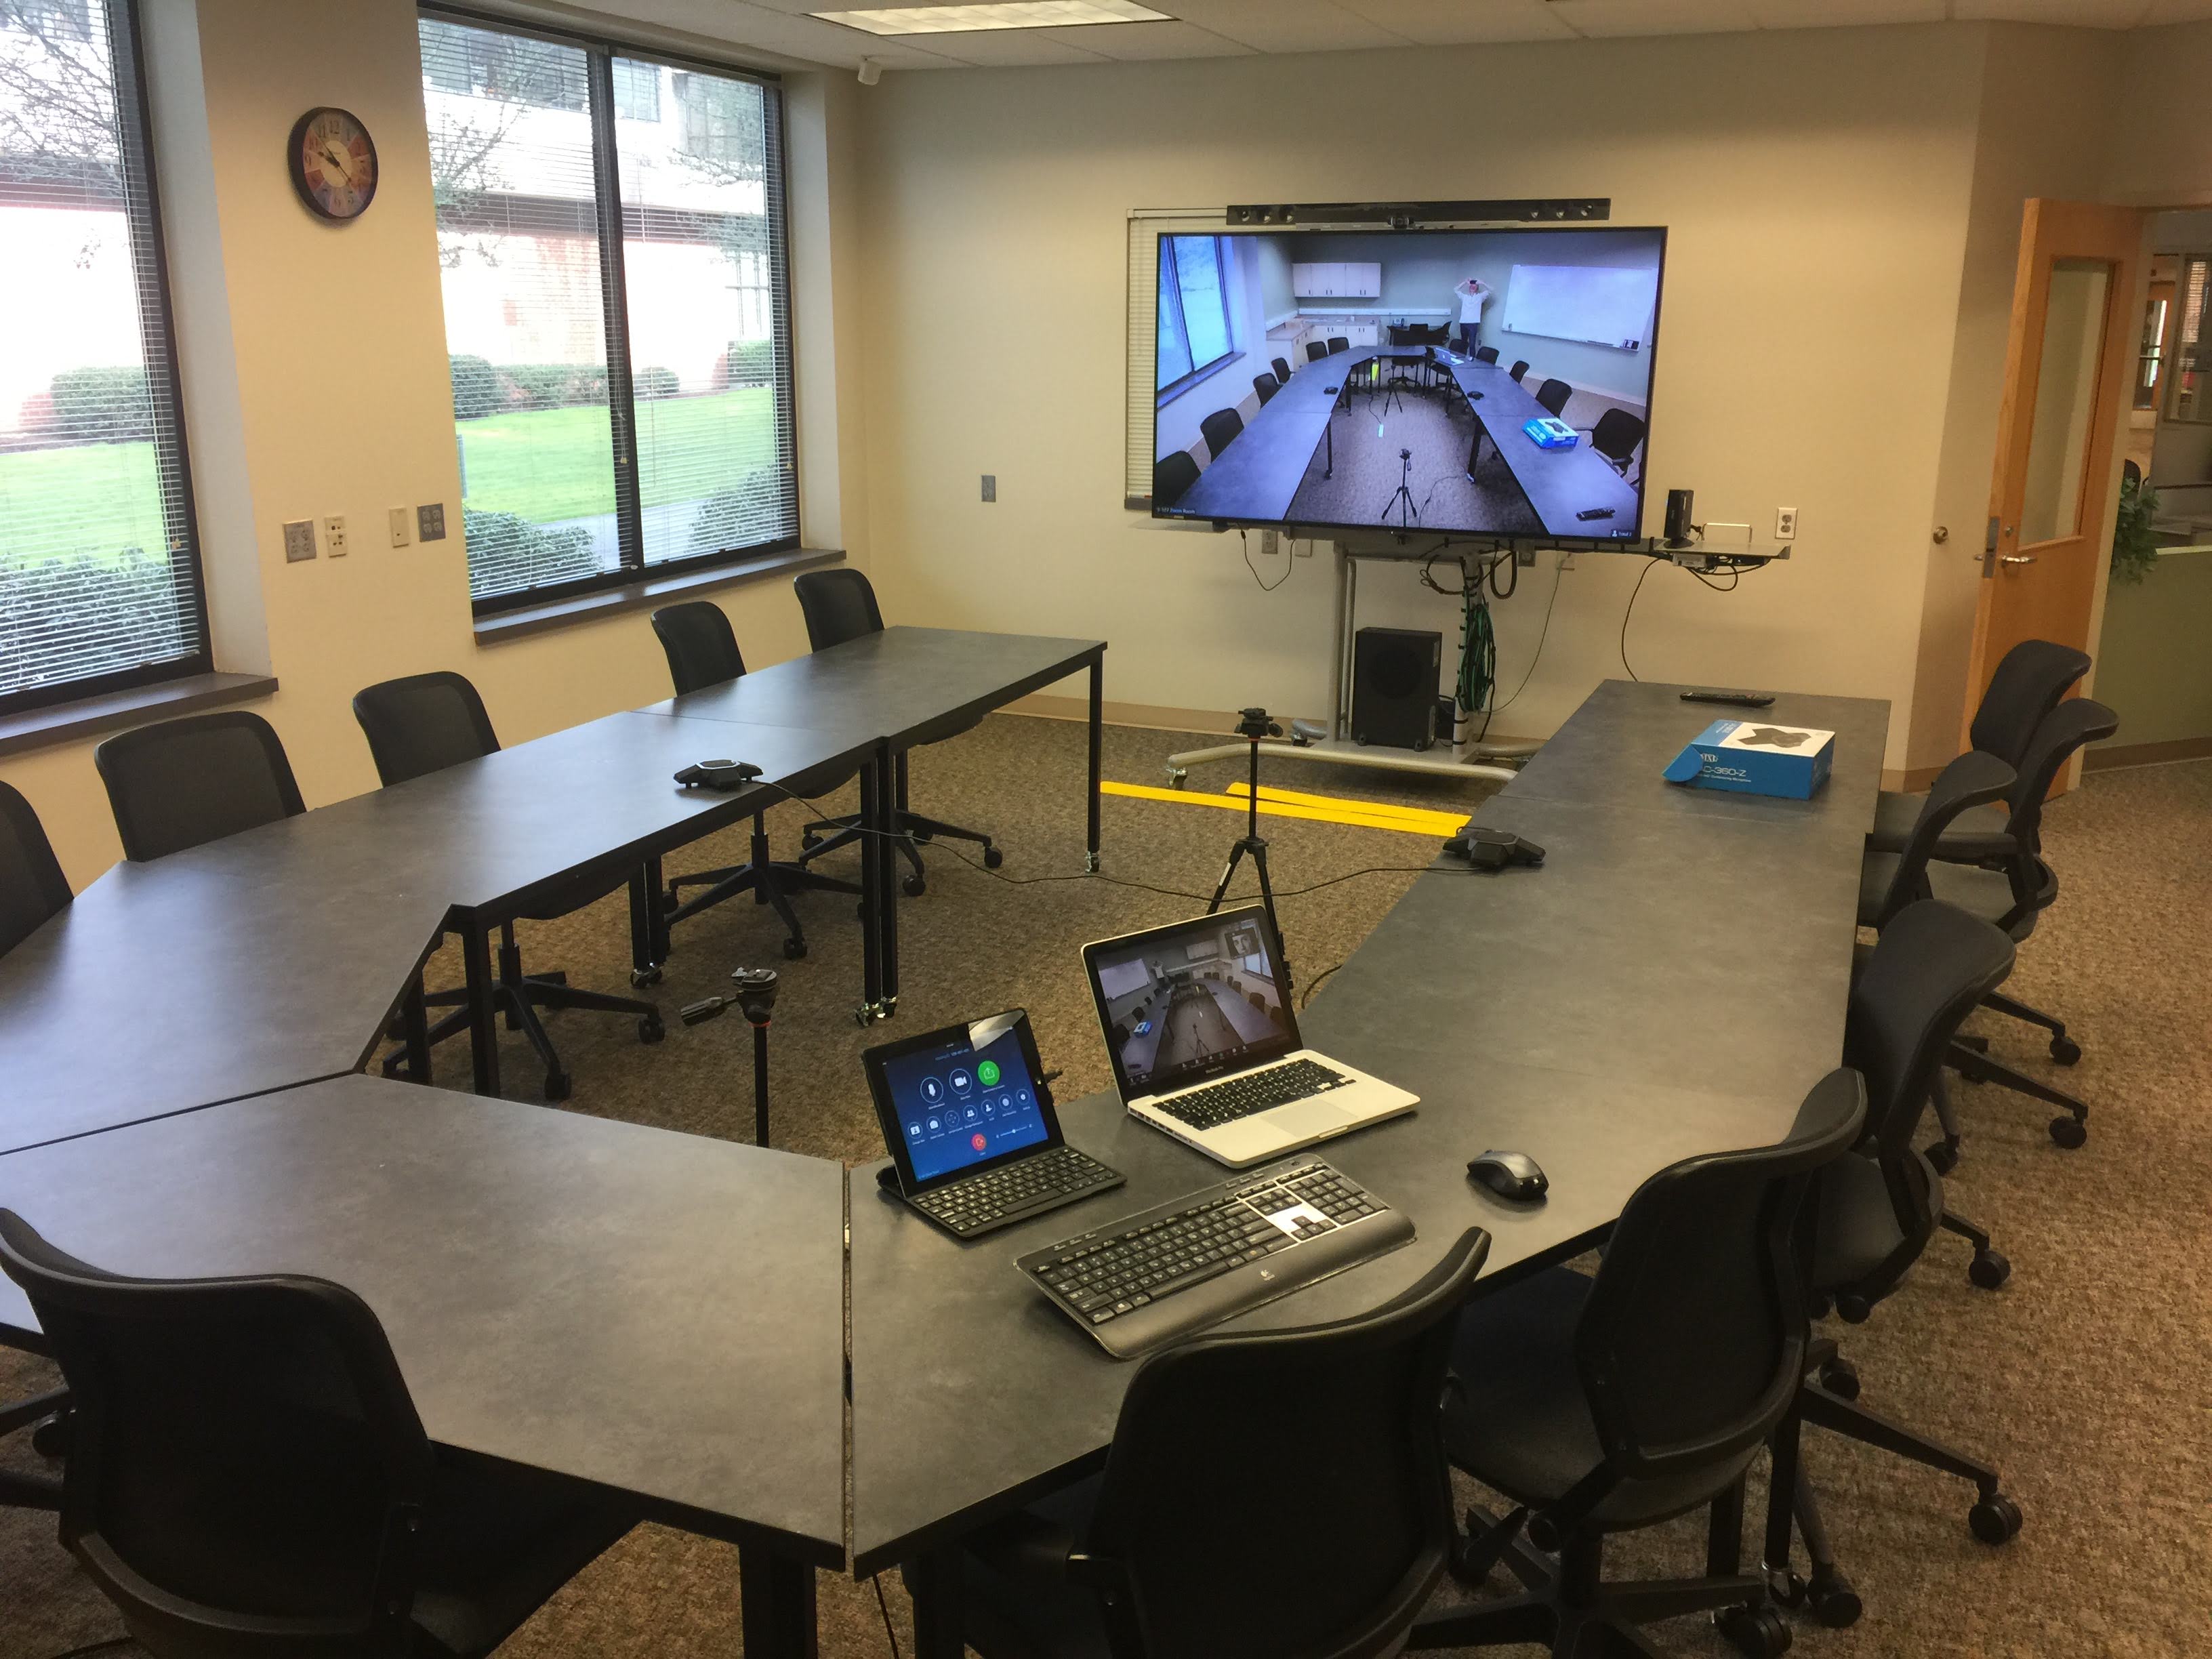 Meeting room showing laptop and iPad running a Zoom Room